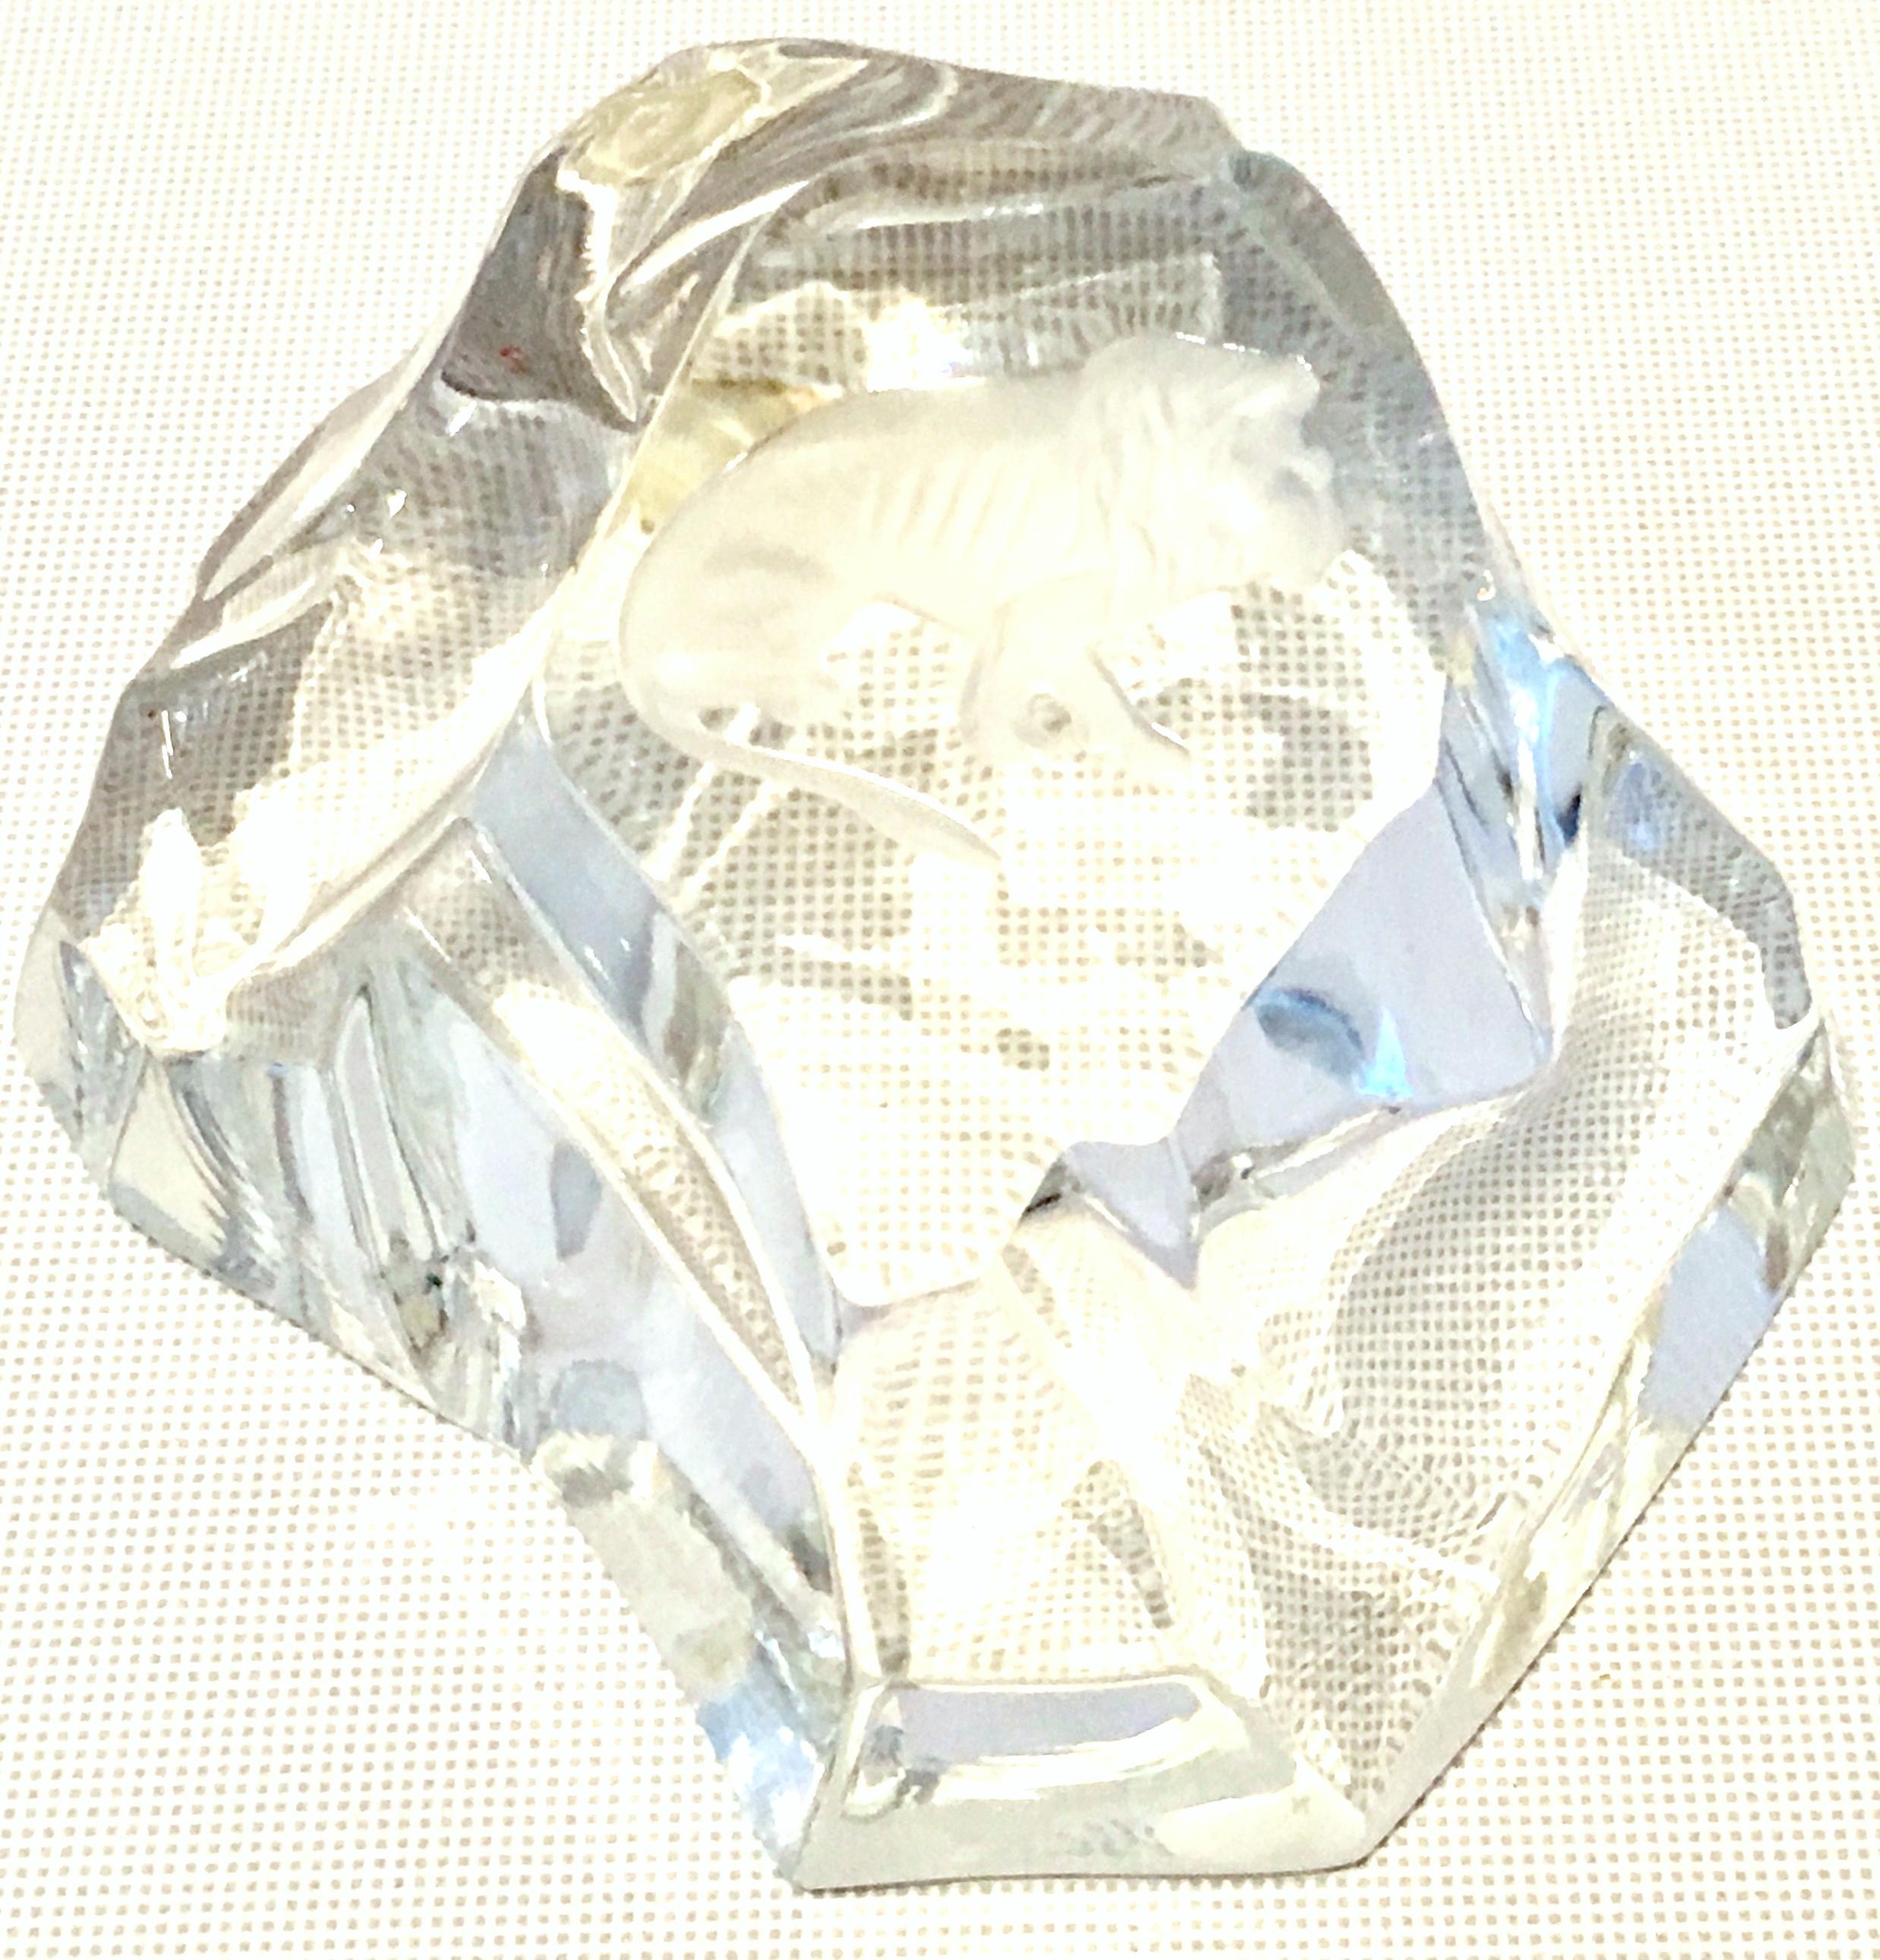 Vintage cut crystal organic form paper weight by Val St. Lambert. Features a organic form rock formation with a frosted central lion figure. Signed on the underside, etched as well as the original Val St. Lambert manufactures gold seal sticker is